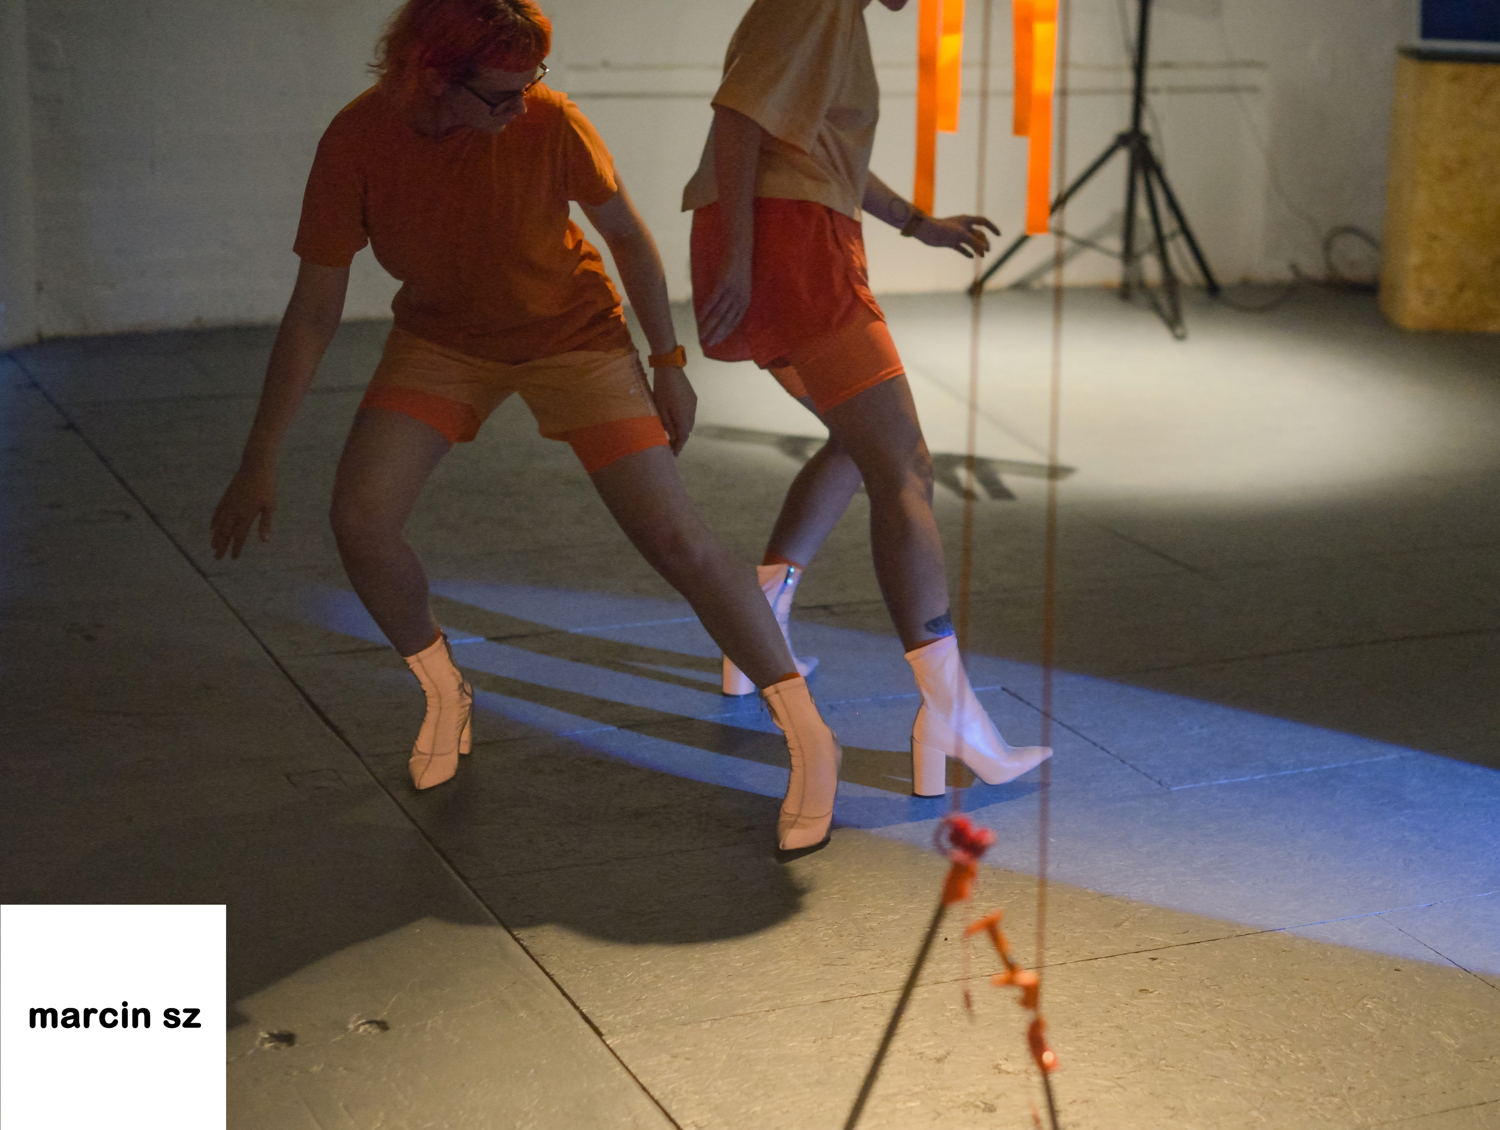 Emily and Emily stand back to back, wearing all orange in an open gallery space. They both have one leg stretched out to the side, wearing reflective heeled boots.